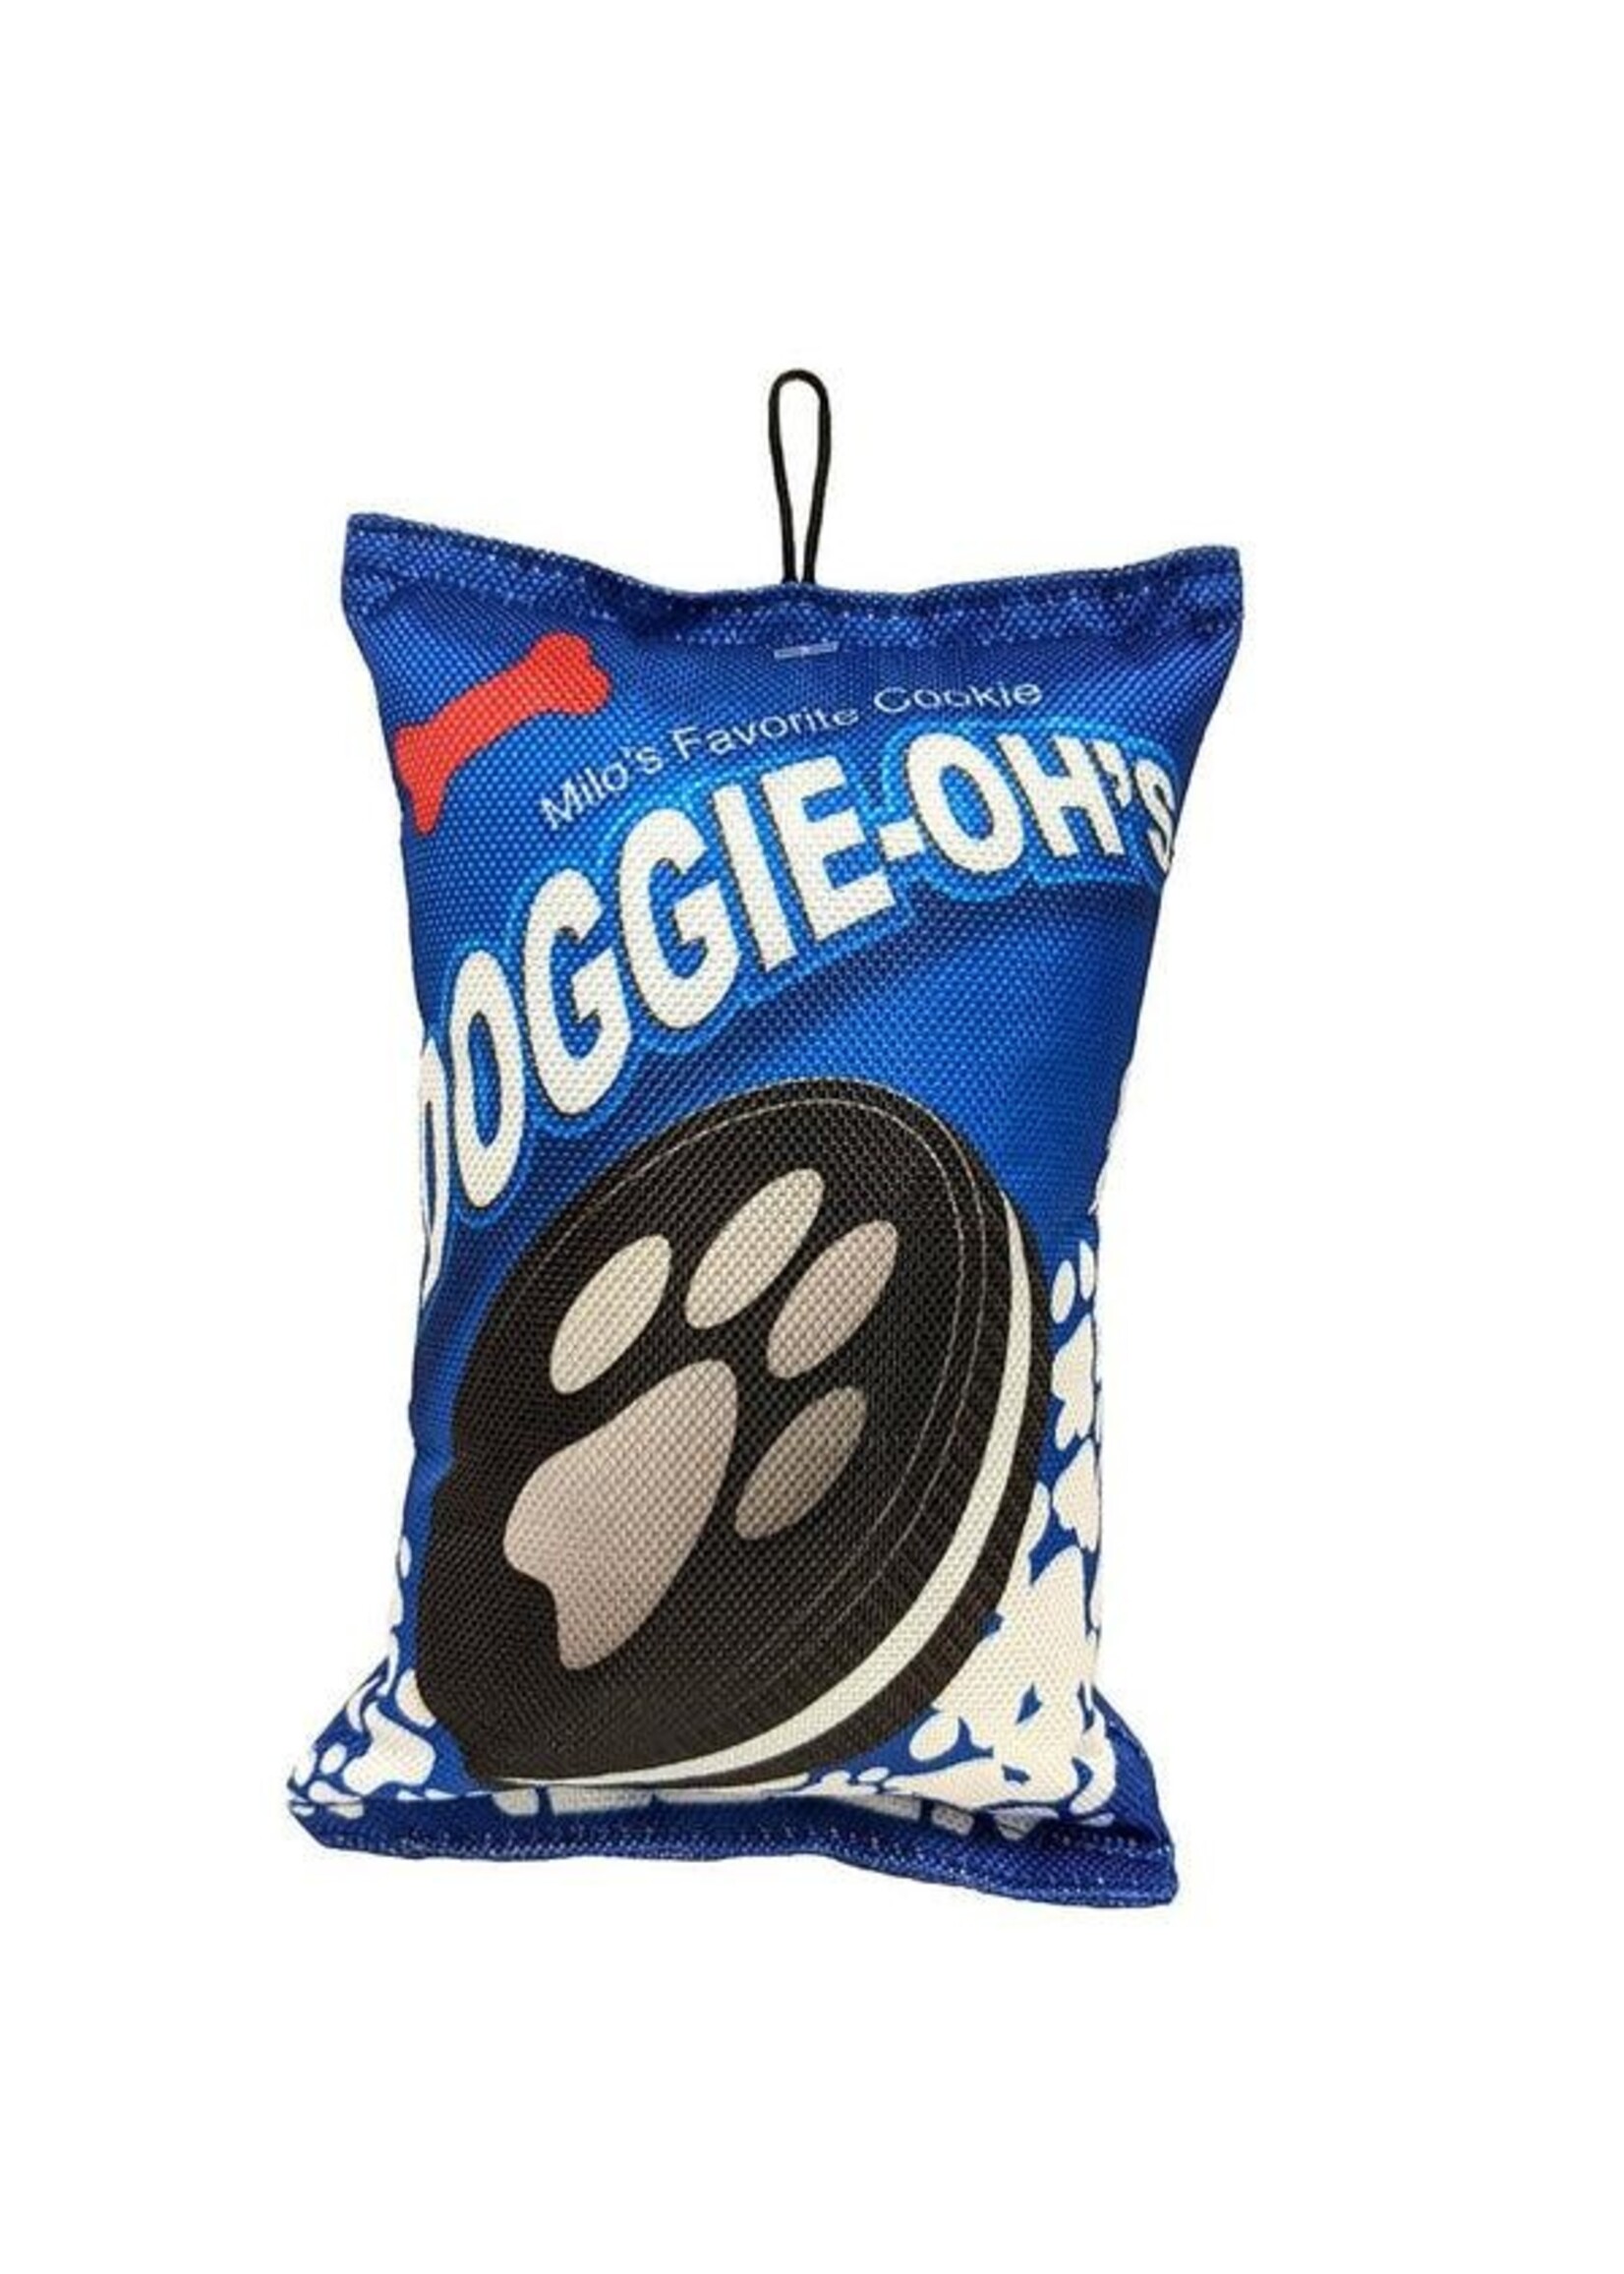 Ethical Ethical Fun Food Cookies Doggie-Oh's 8"